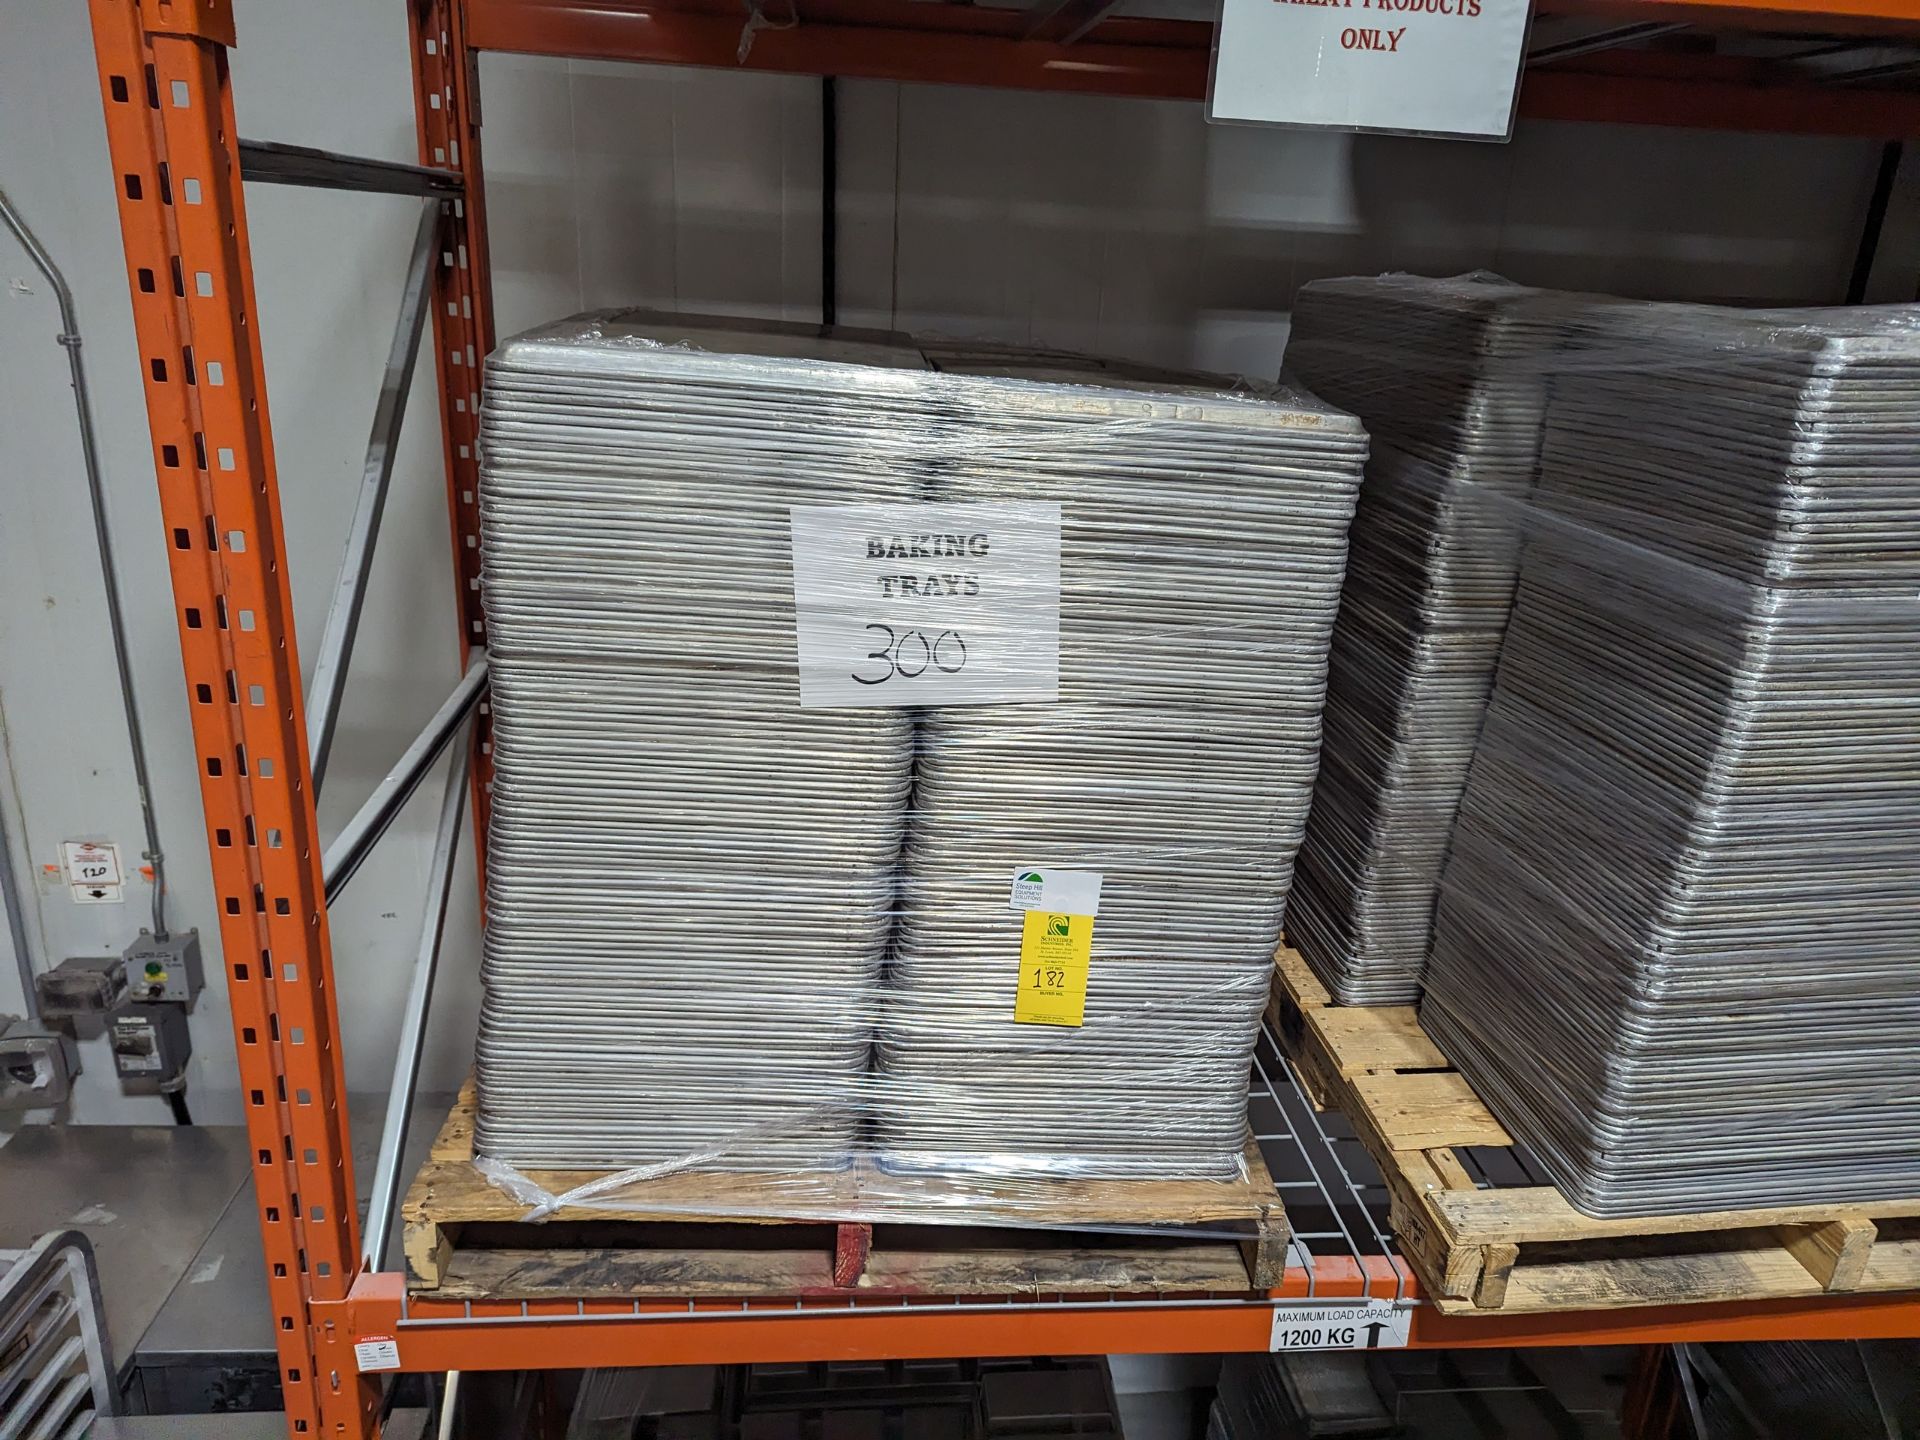 Lot of 300 Baking Sheets, Dimensions LxWxH: 48x40x40 - Image 2 of 2